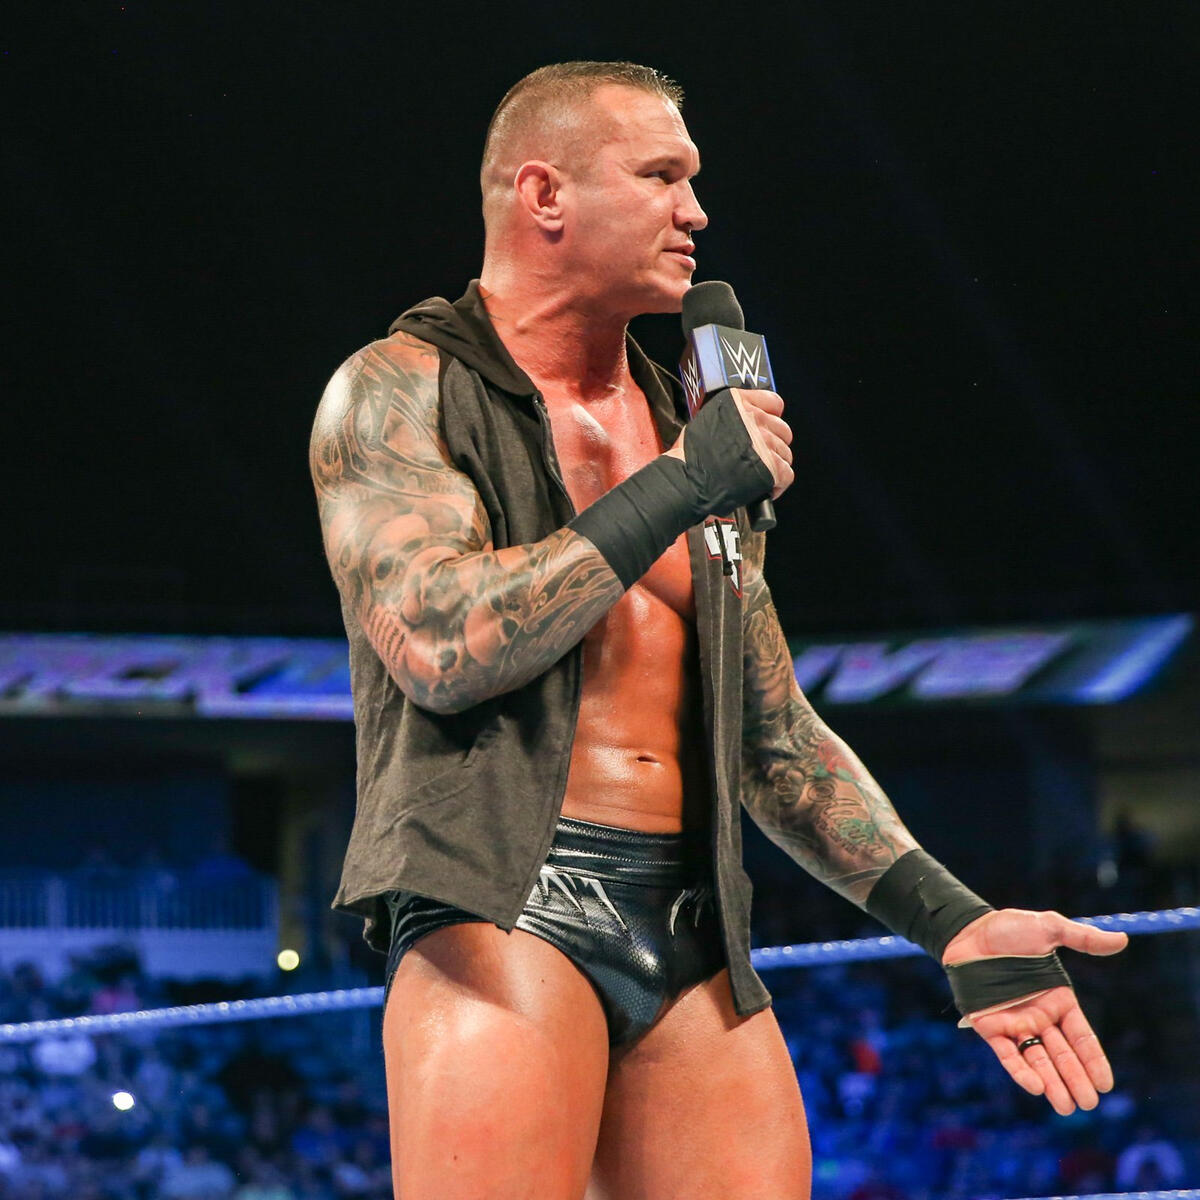 â€¦ including unfinished business with Hardy and being No. 9 on the SmackDown Top 10 List.